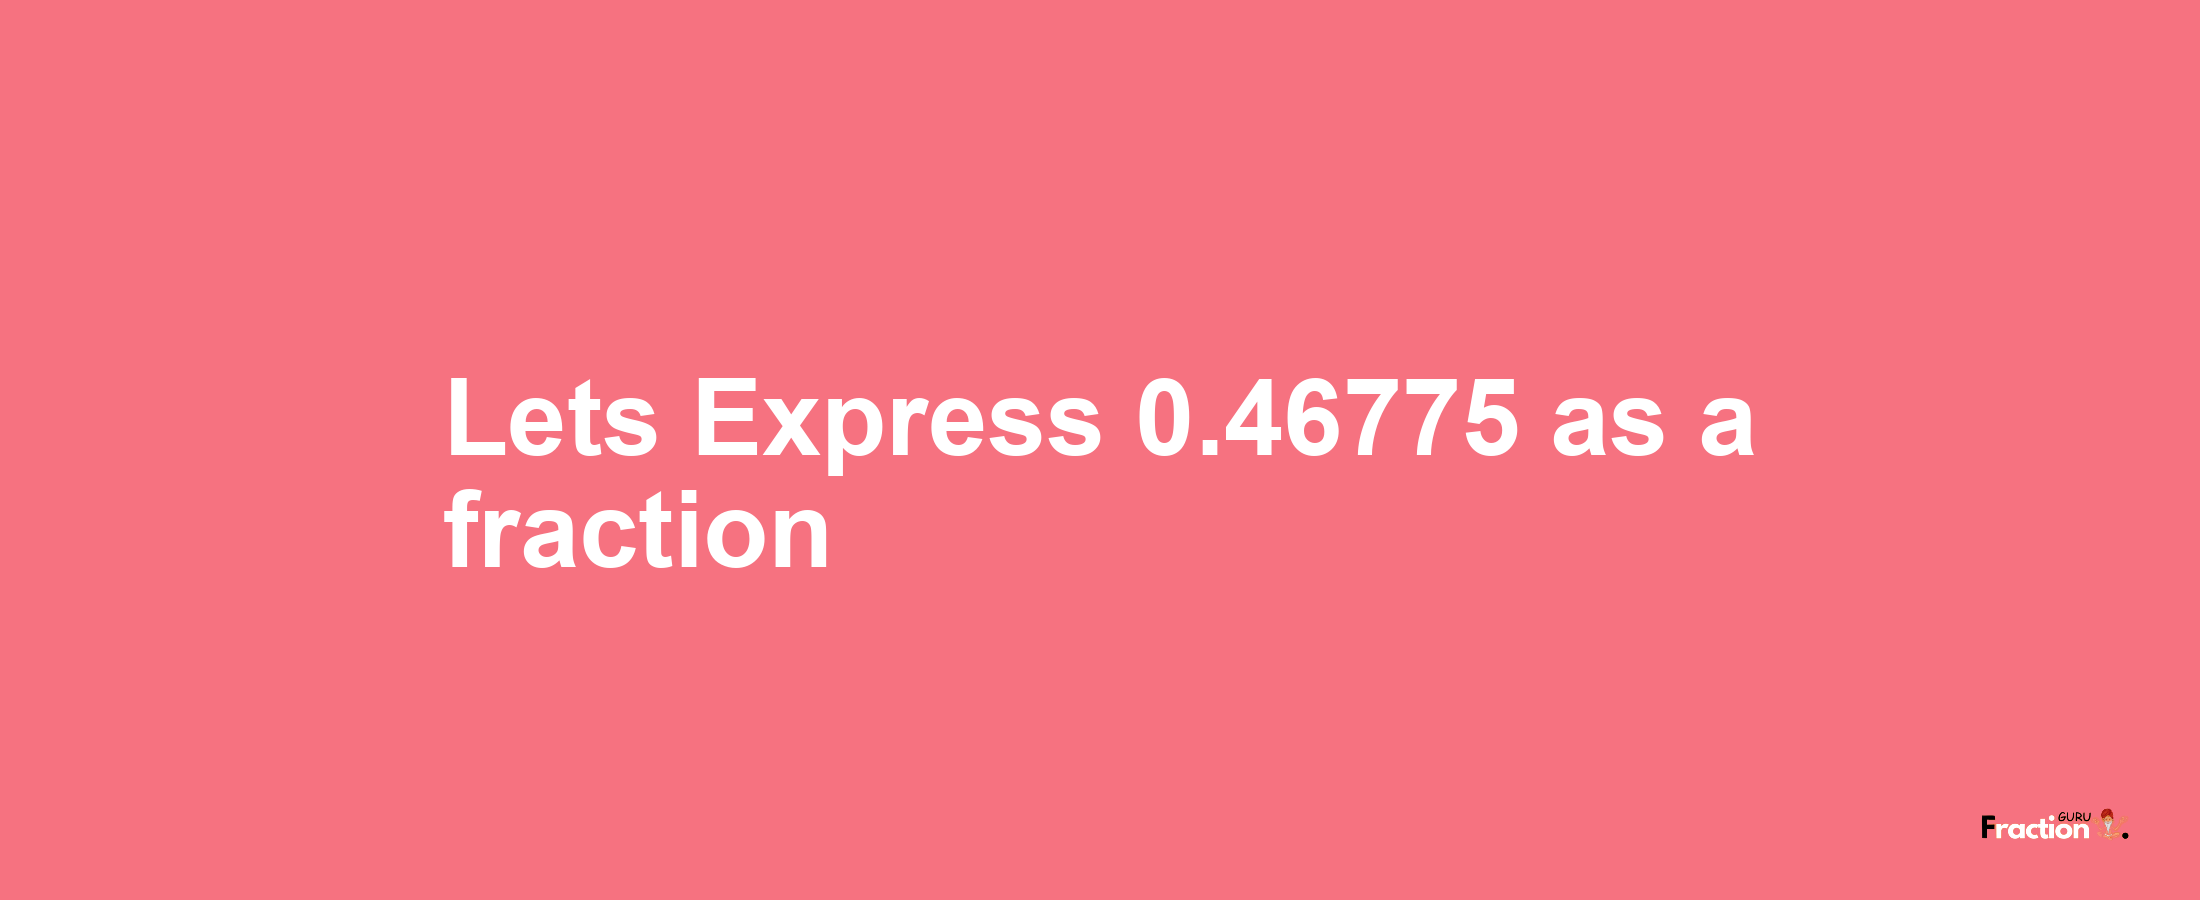 Lets Express 0.46775 as afraction